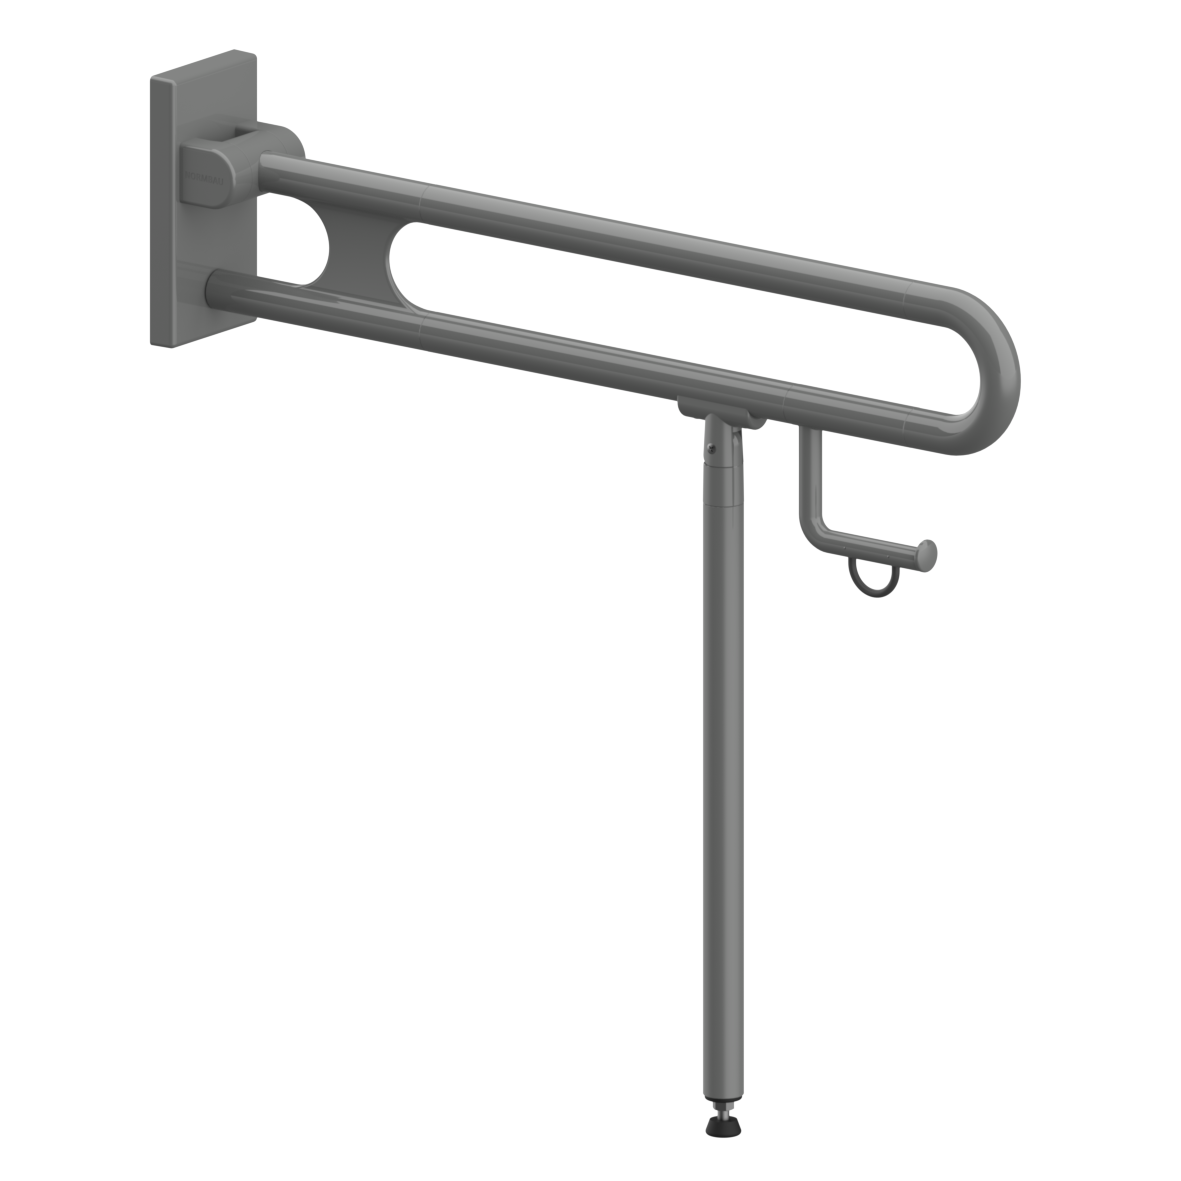 Nylon Care Lift-up support rail vario, with base plate, with toilet roll holder and floor support (750 mm), left and right, L = 850 mm, Dark grey